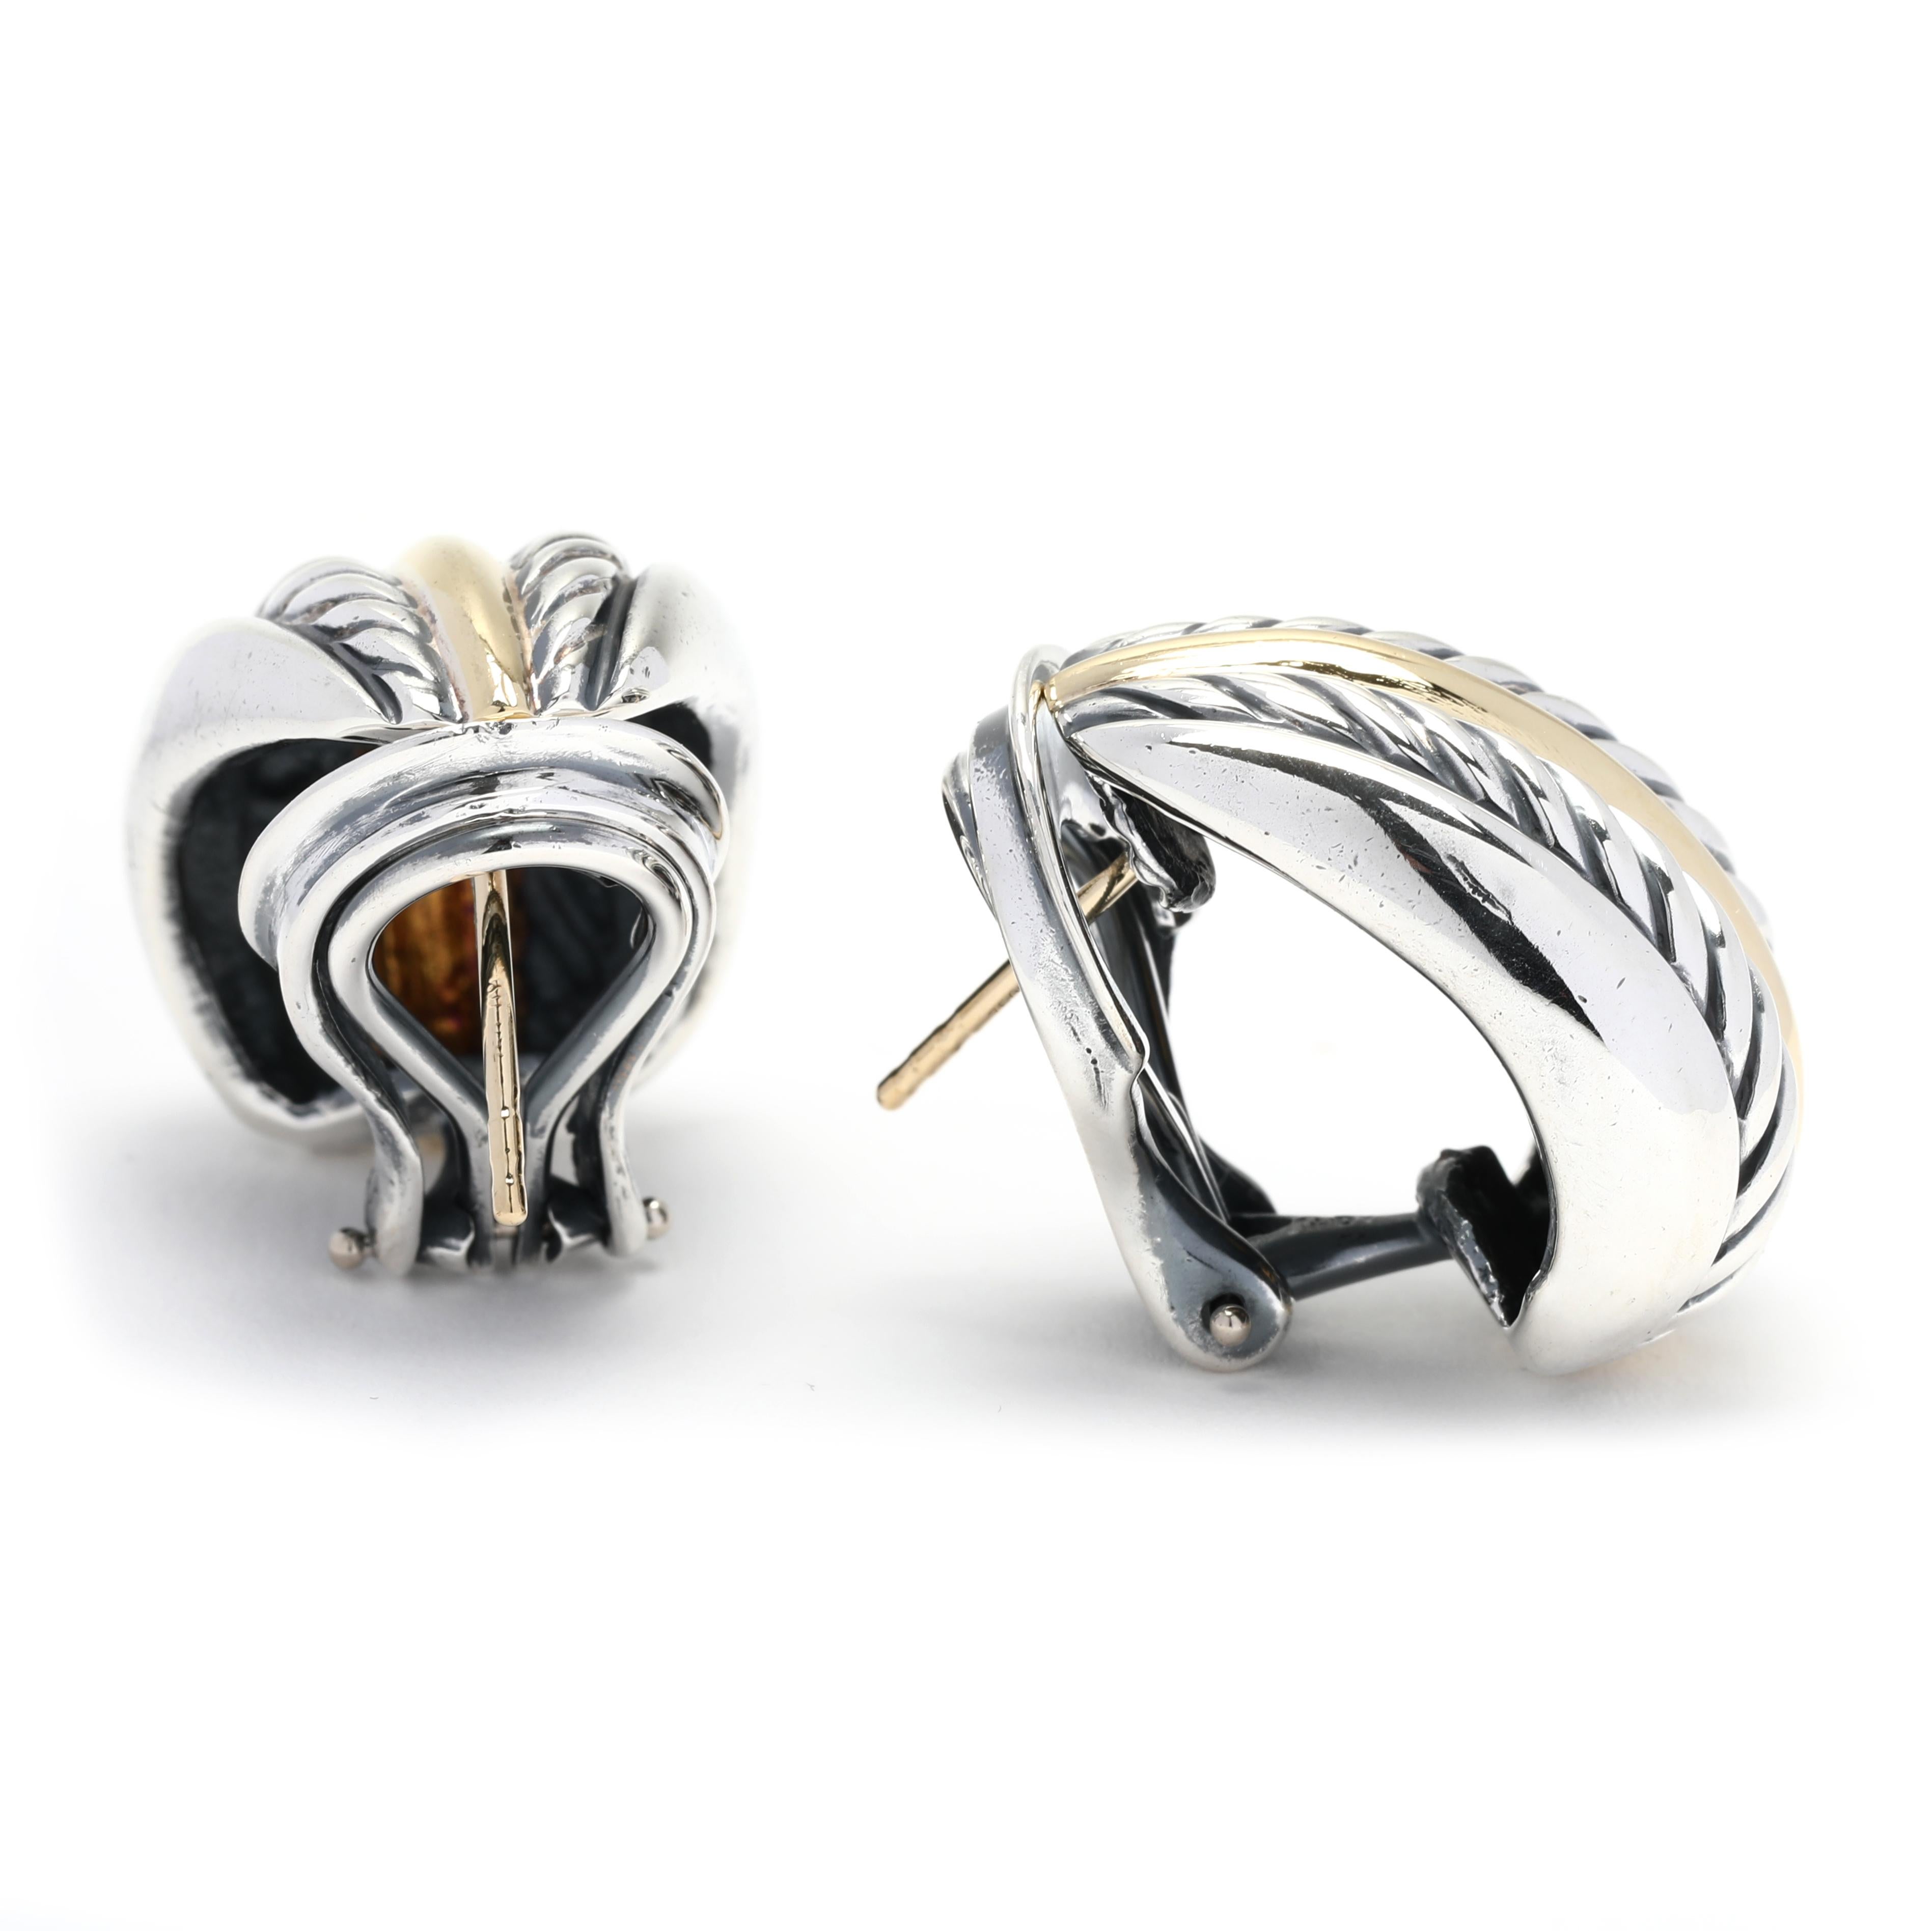 These large David Yurman hoop earrings ensure a timeless and luxurious addition to any jewelry collection. Beautifully crafted from 18K yellow gold and sterling silver, these 7/8 inch Thoroughbred J Hoops possess an iconic silhouette and sparkling